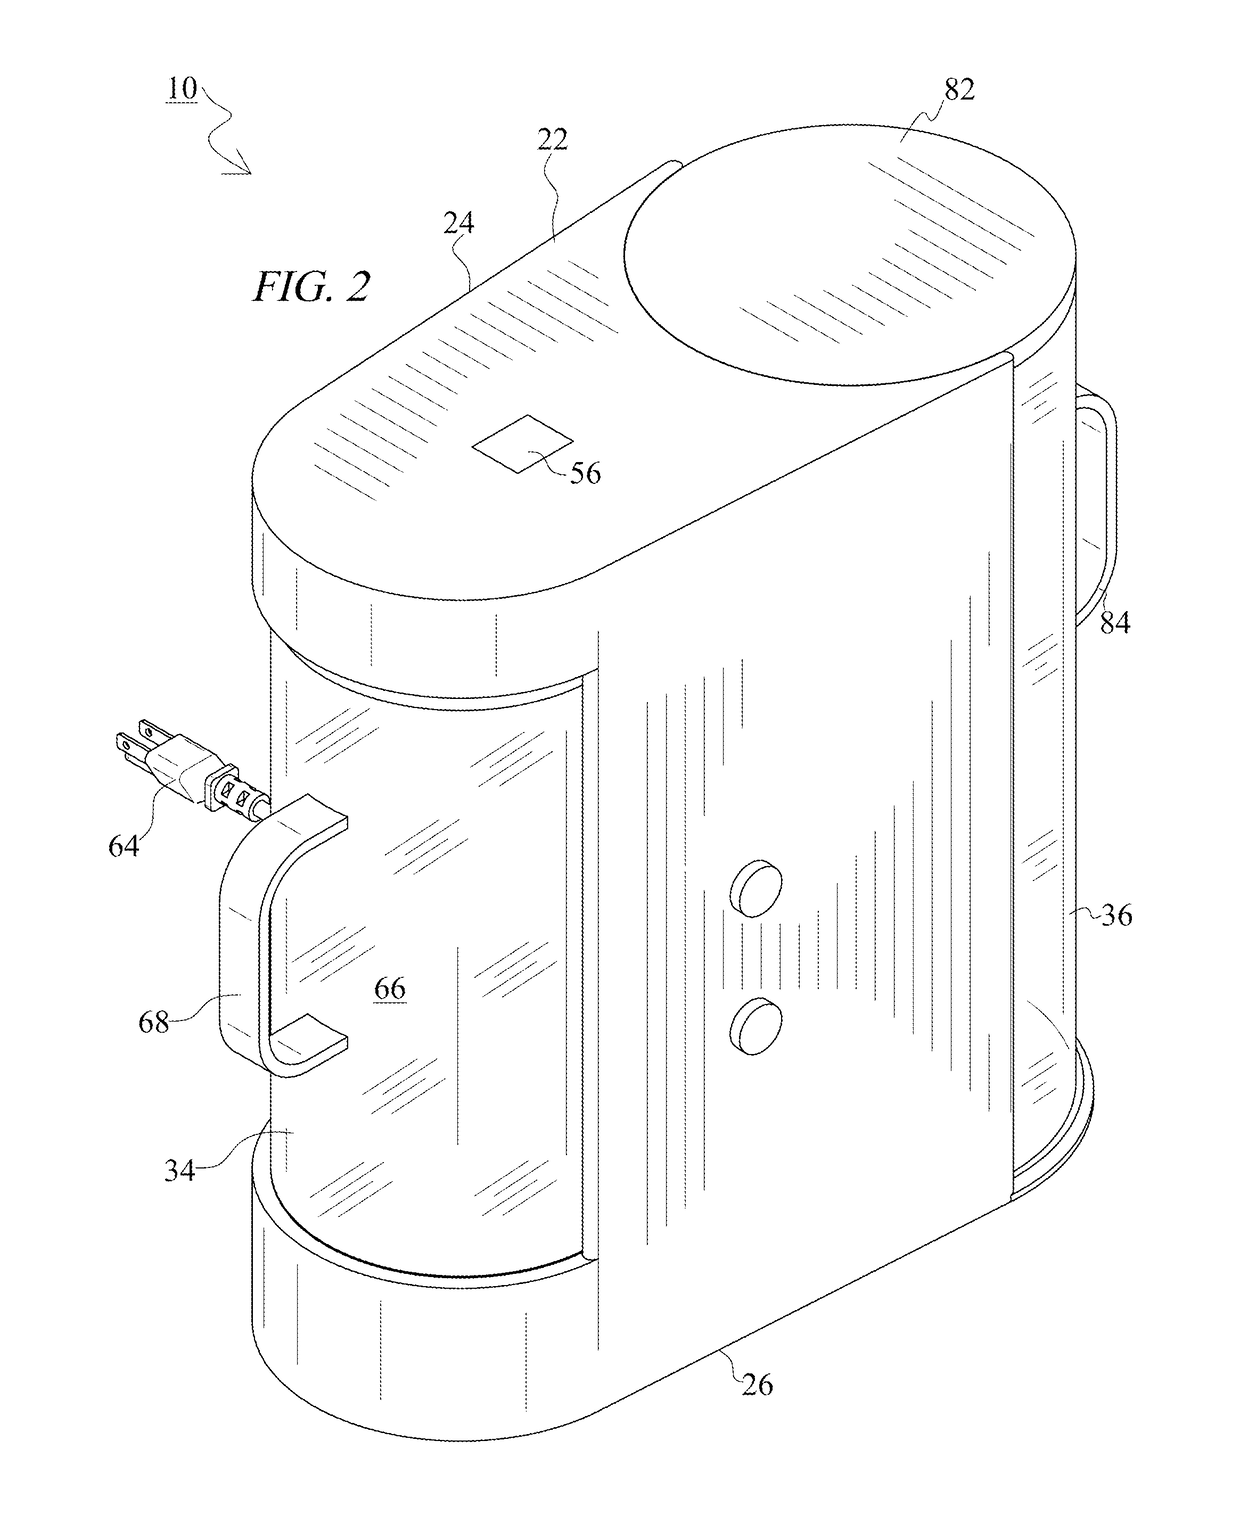 Apparatus and Method for Washing and Sanitizing Articles for an Infant